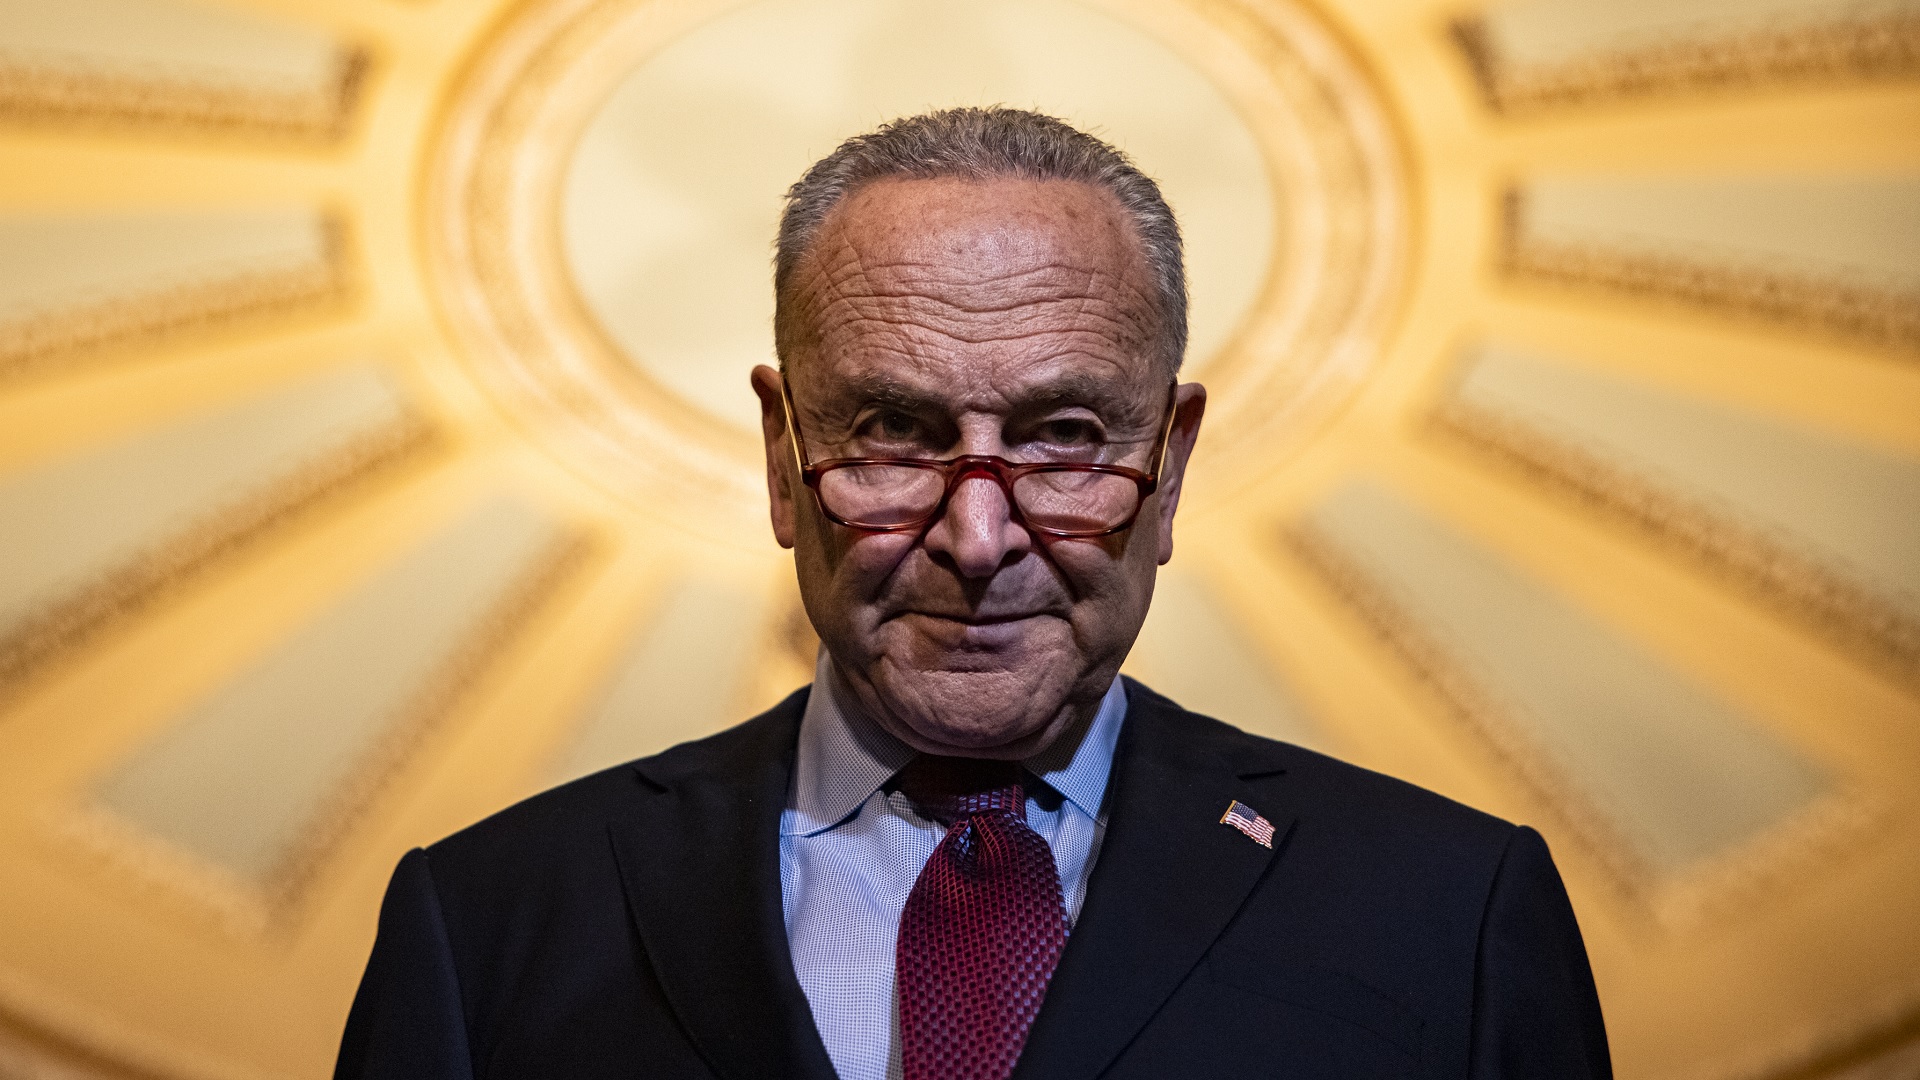 Schumer Claims Senate GOP Opposition to Democrats’ Voting Rights Bill Tied to January 6 Violence